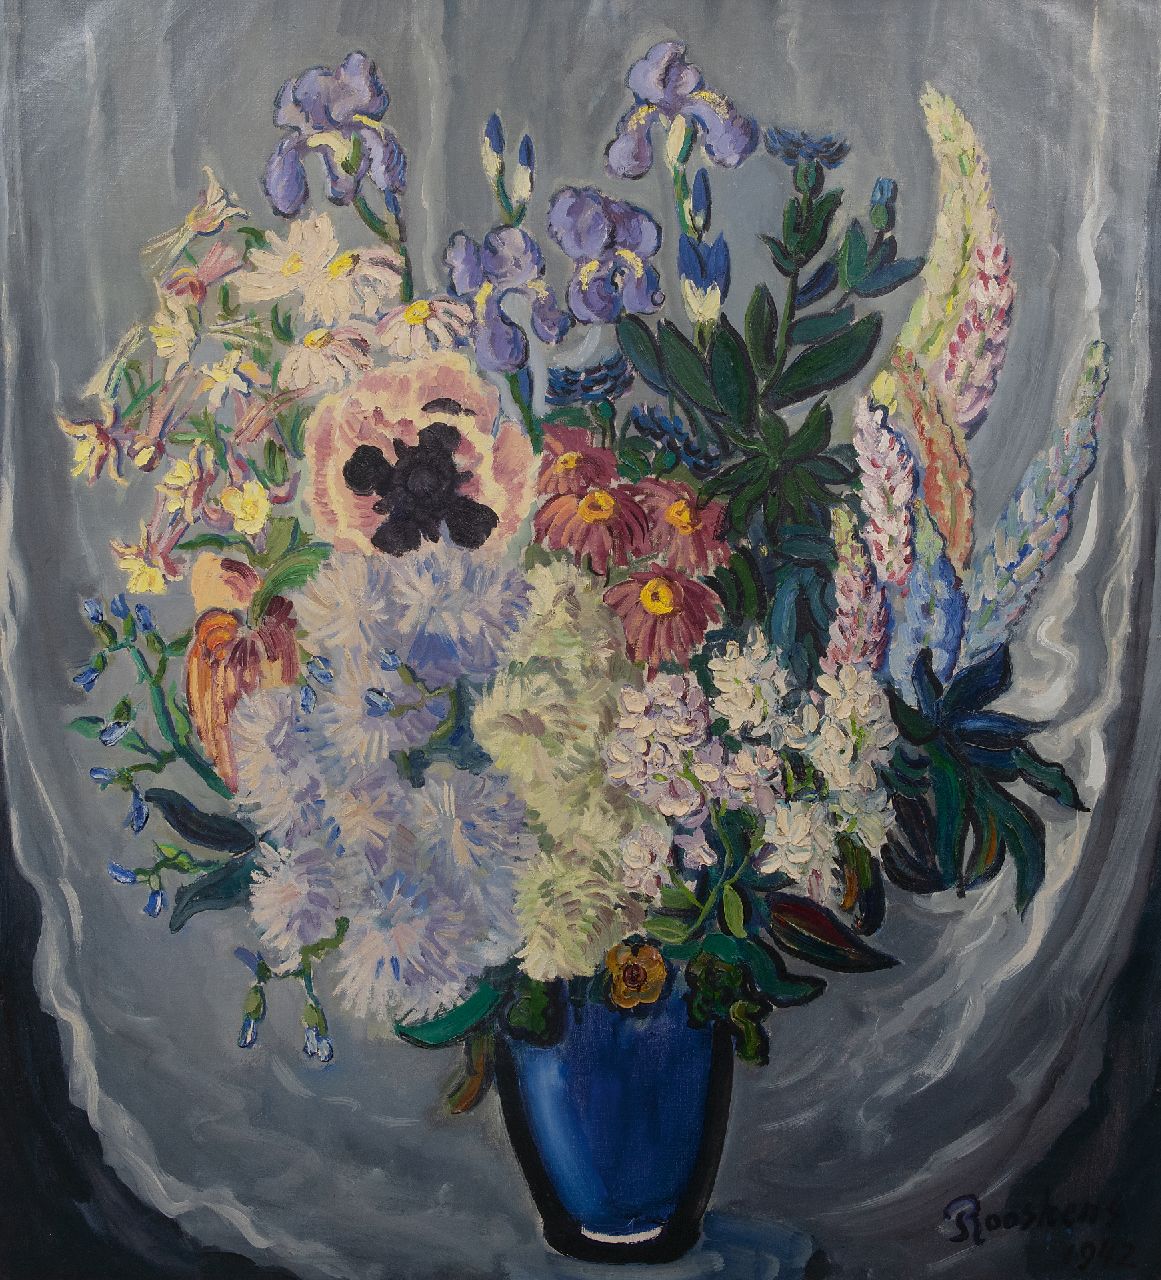 Rooskens J.A.  | Joseph Antoon 'Anton' Rooskens | Paintings offered for sale | Flower still life, oil on canvas 114.4 x 104.5 cm, signed l.r. and dated 1942